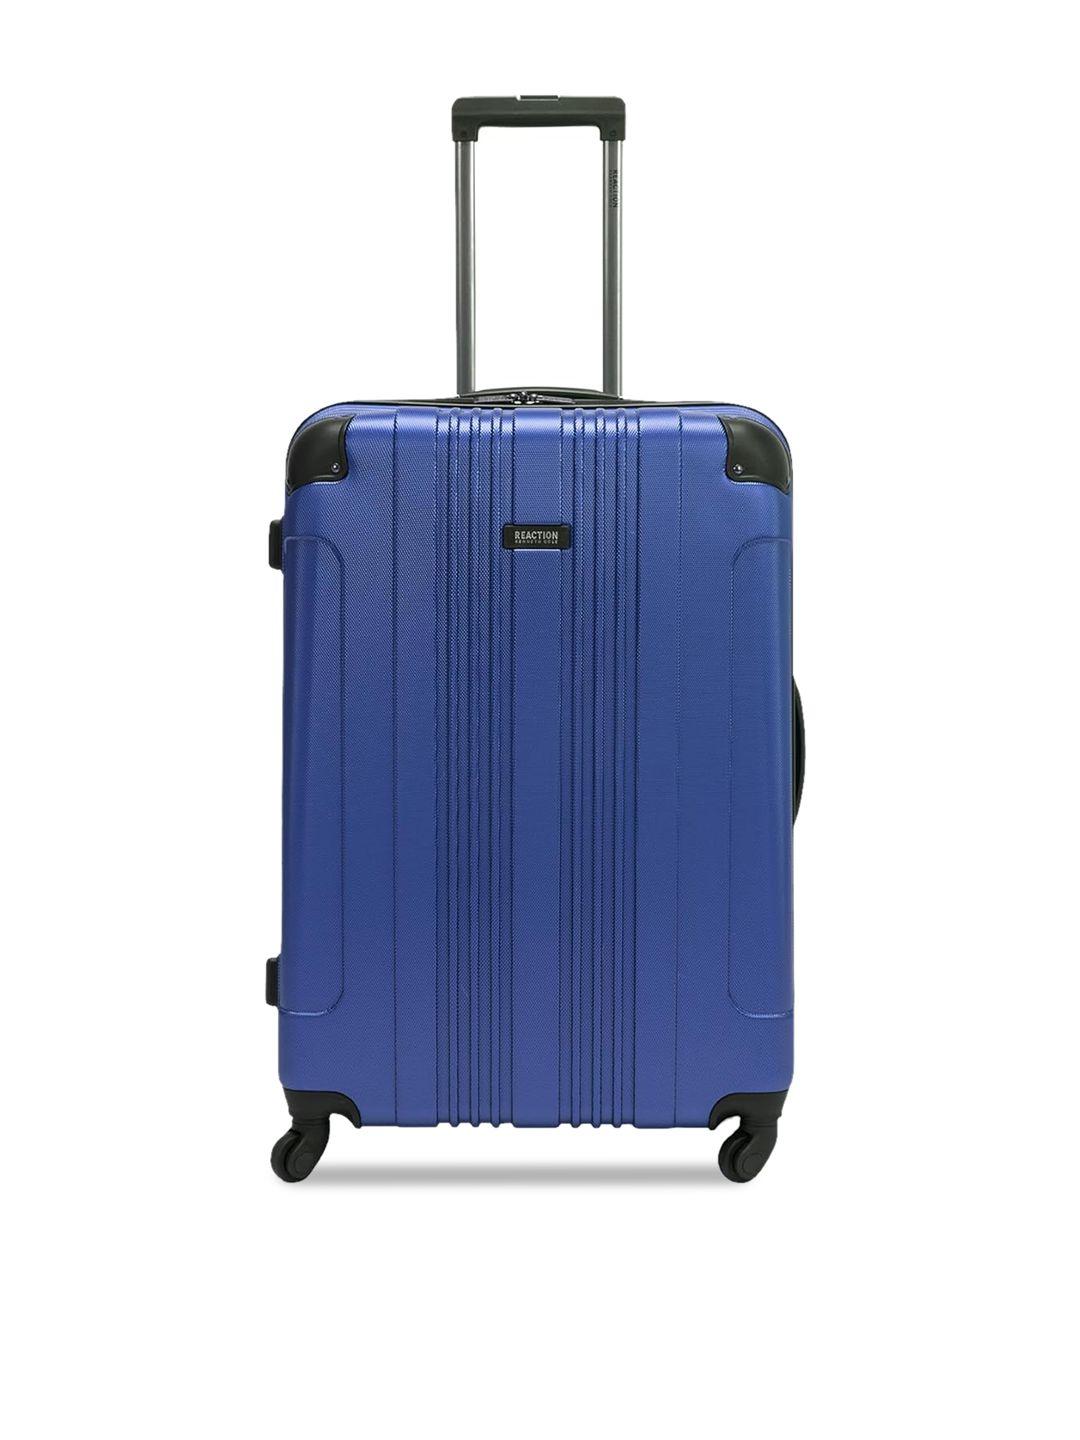 kenneth cole textured hard-sided large trolley suitcase